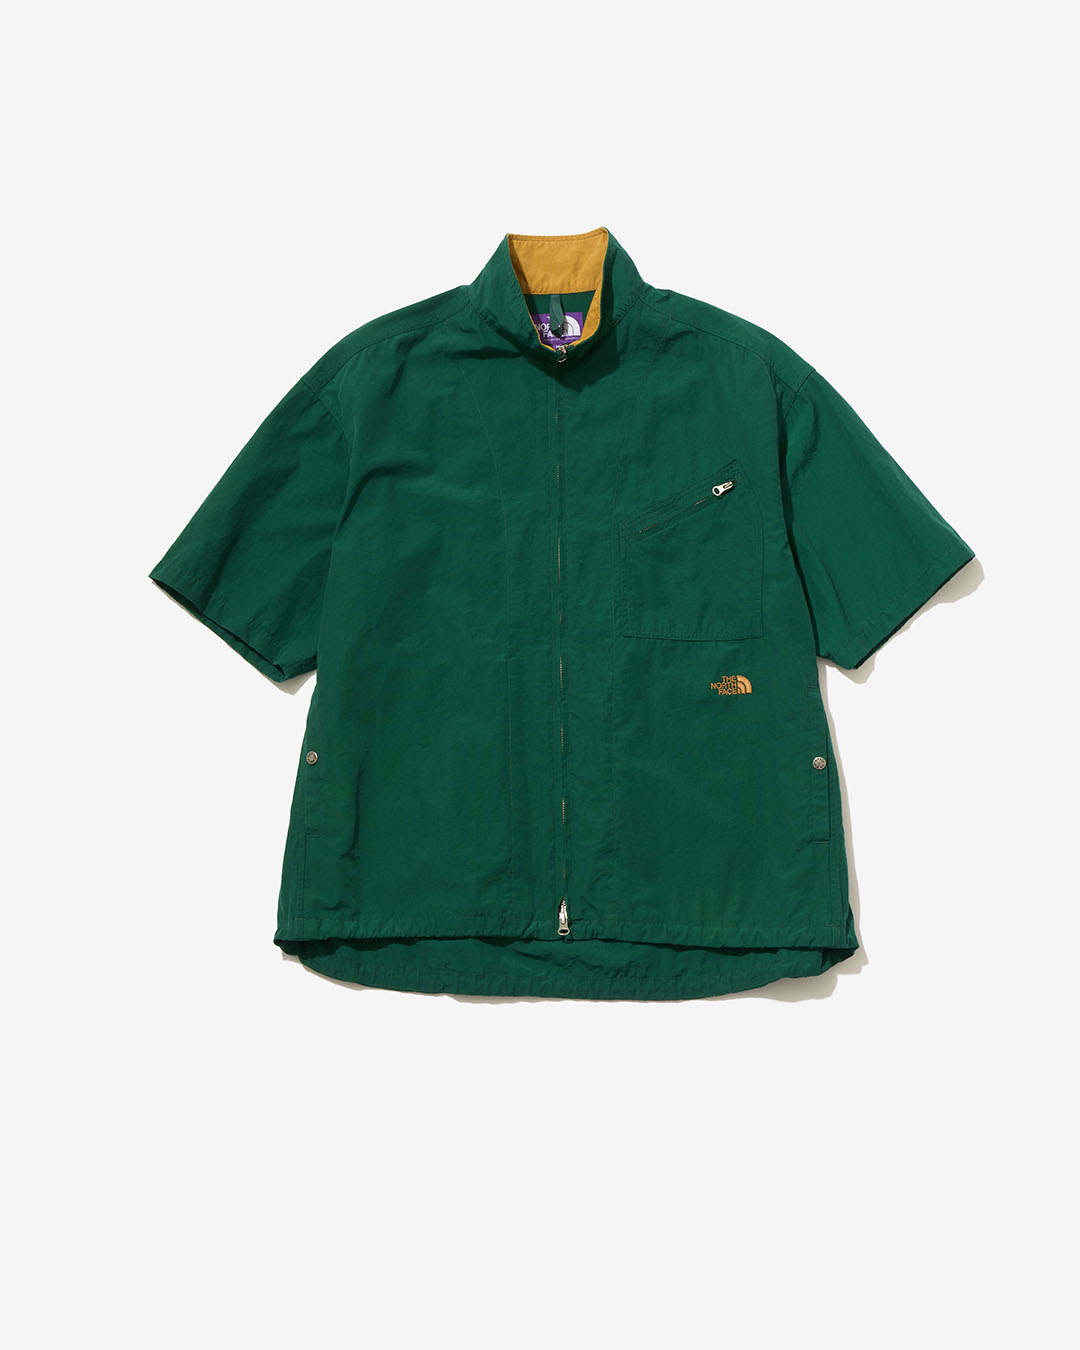 nanamica / THE NORTH FACE PURPLE LABEL / Featured Product vol.71